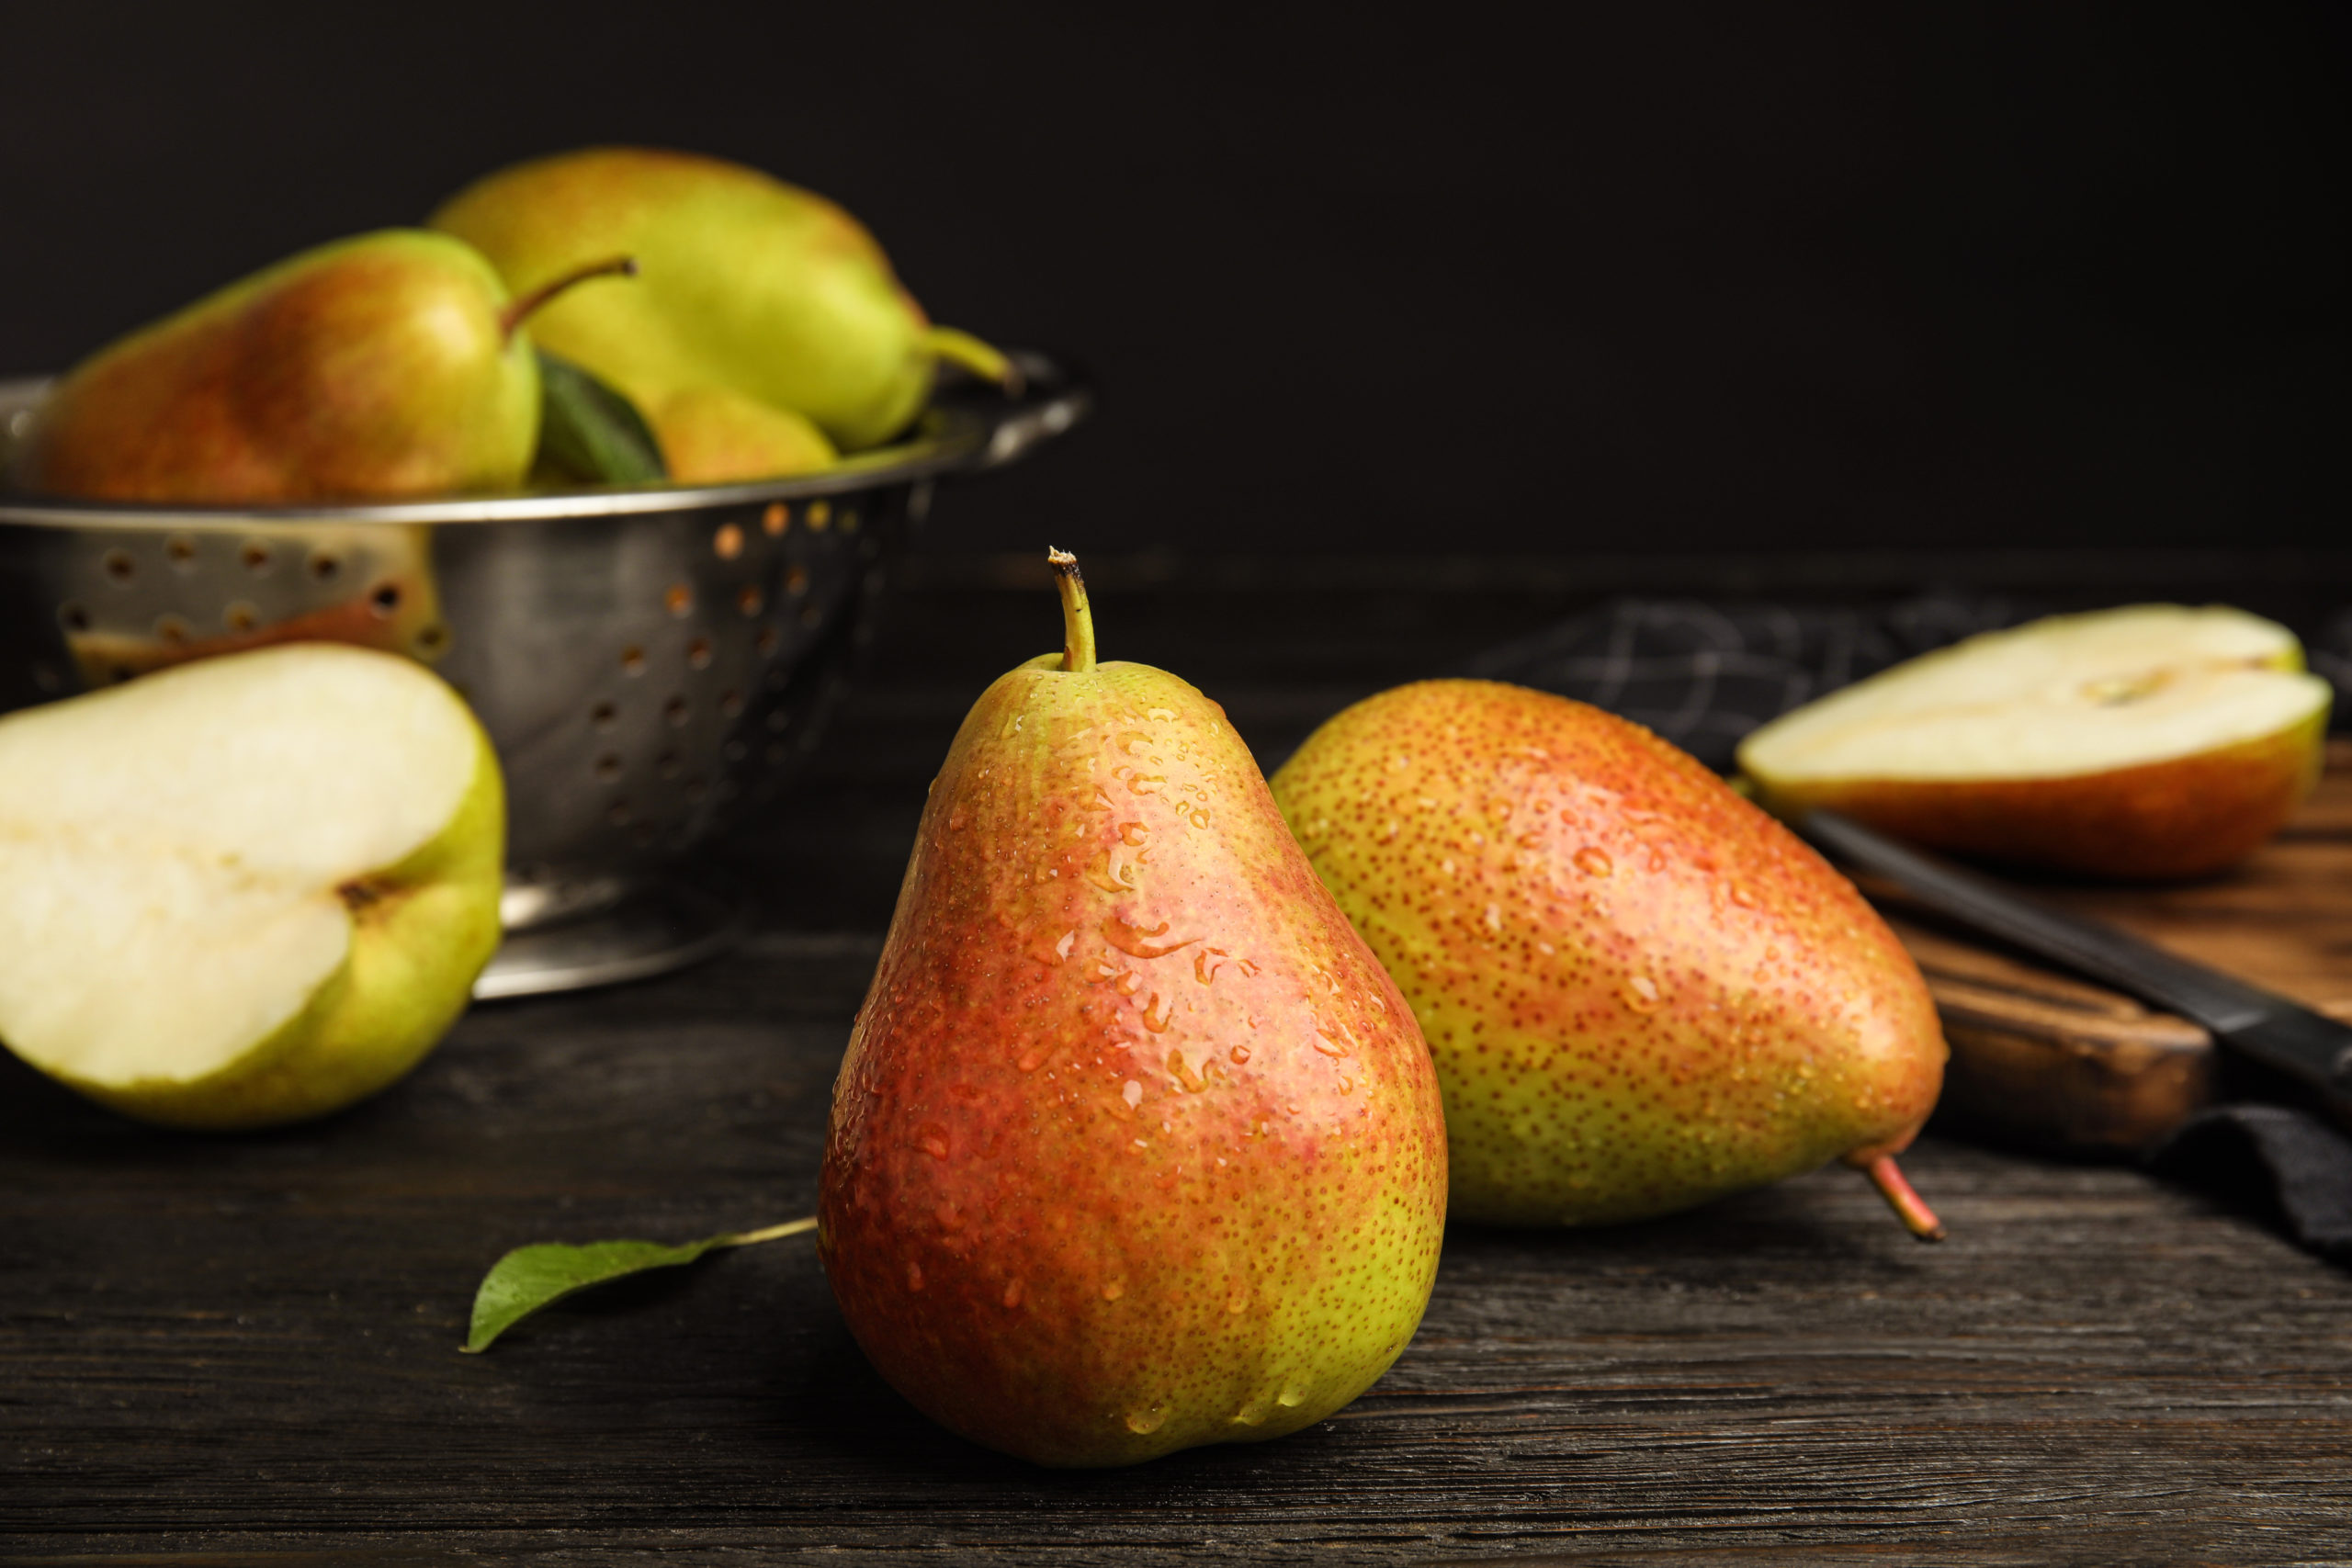 One food item that you wouldn't think to go mainstream on menus is a pear. With 13% of fine dining restaurants menuing pears, the growth is here to stay.